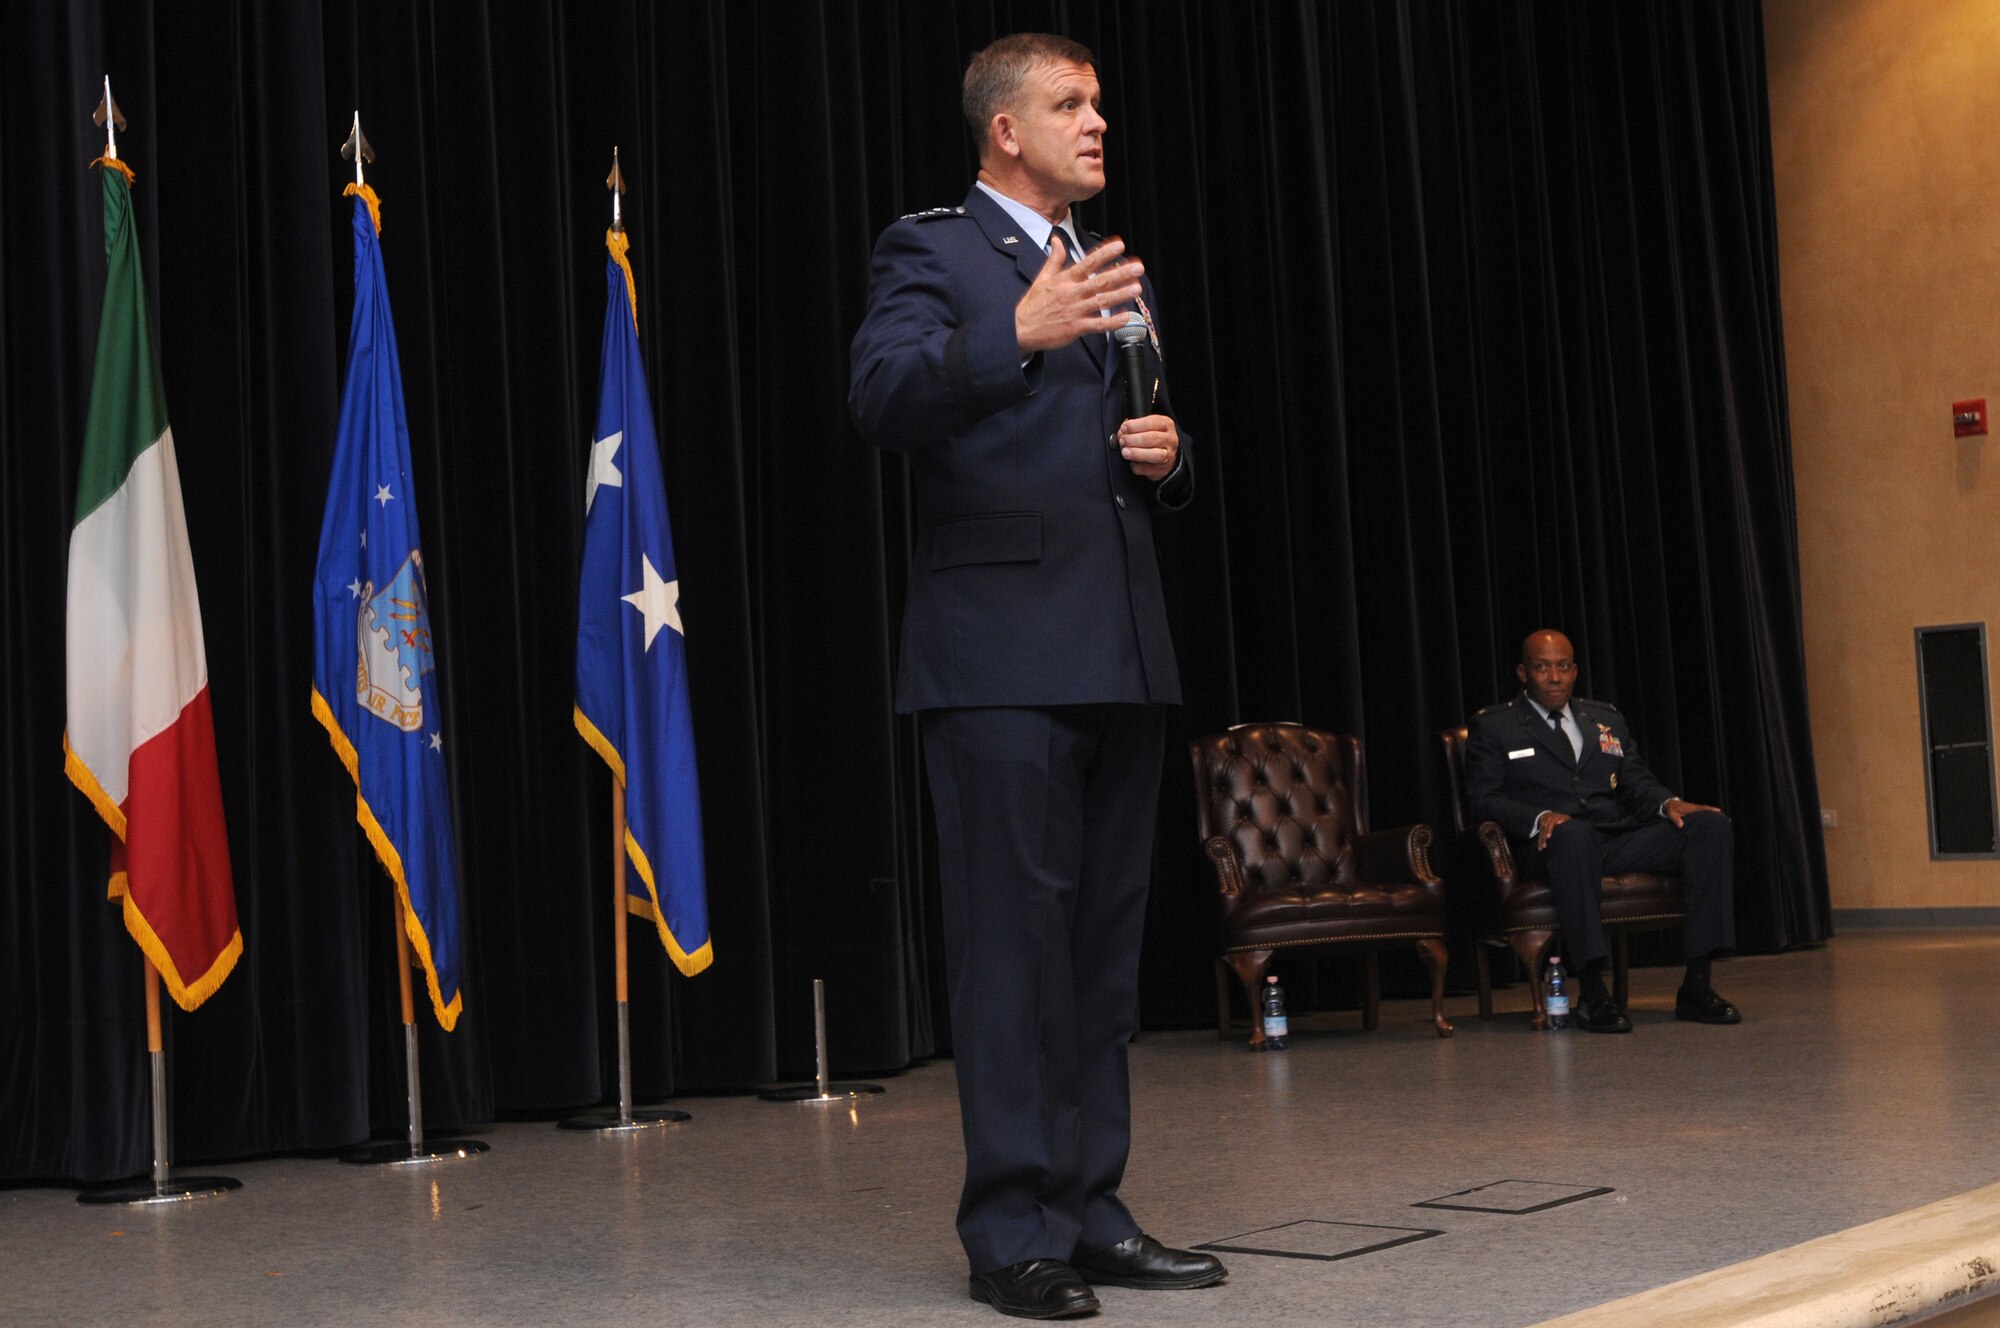 Lt. Gen. Frank Gorenc, 3rd Air Force commander, Ramstein Air Base, Germany addresses those who attended Col. Charles Q. Brown Jr., 31st Fighter Wing commander’s promotion ceremony Sept. 18, 2009 at Aviano Air Base, Italy.  General Gorenc spoke to the distinguished visitors and base personnel in attendance about Colonel Brown and his career path leading up to his selection for and promotion to the rank of brigadier general.    (U.S. Air Force photo/Staff Sgt. Patrick Dixon) 